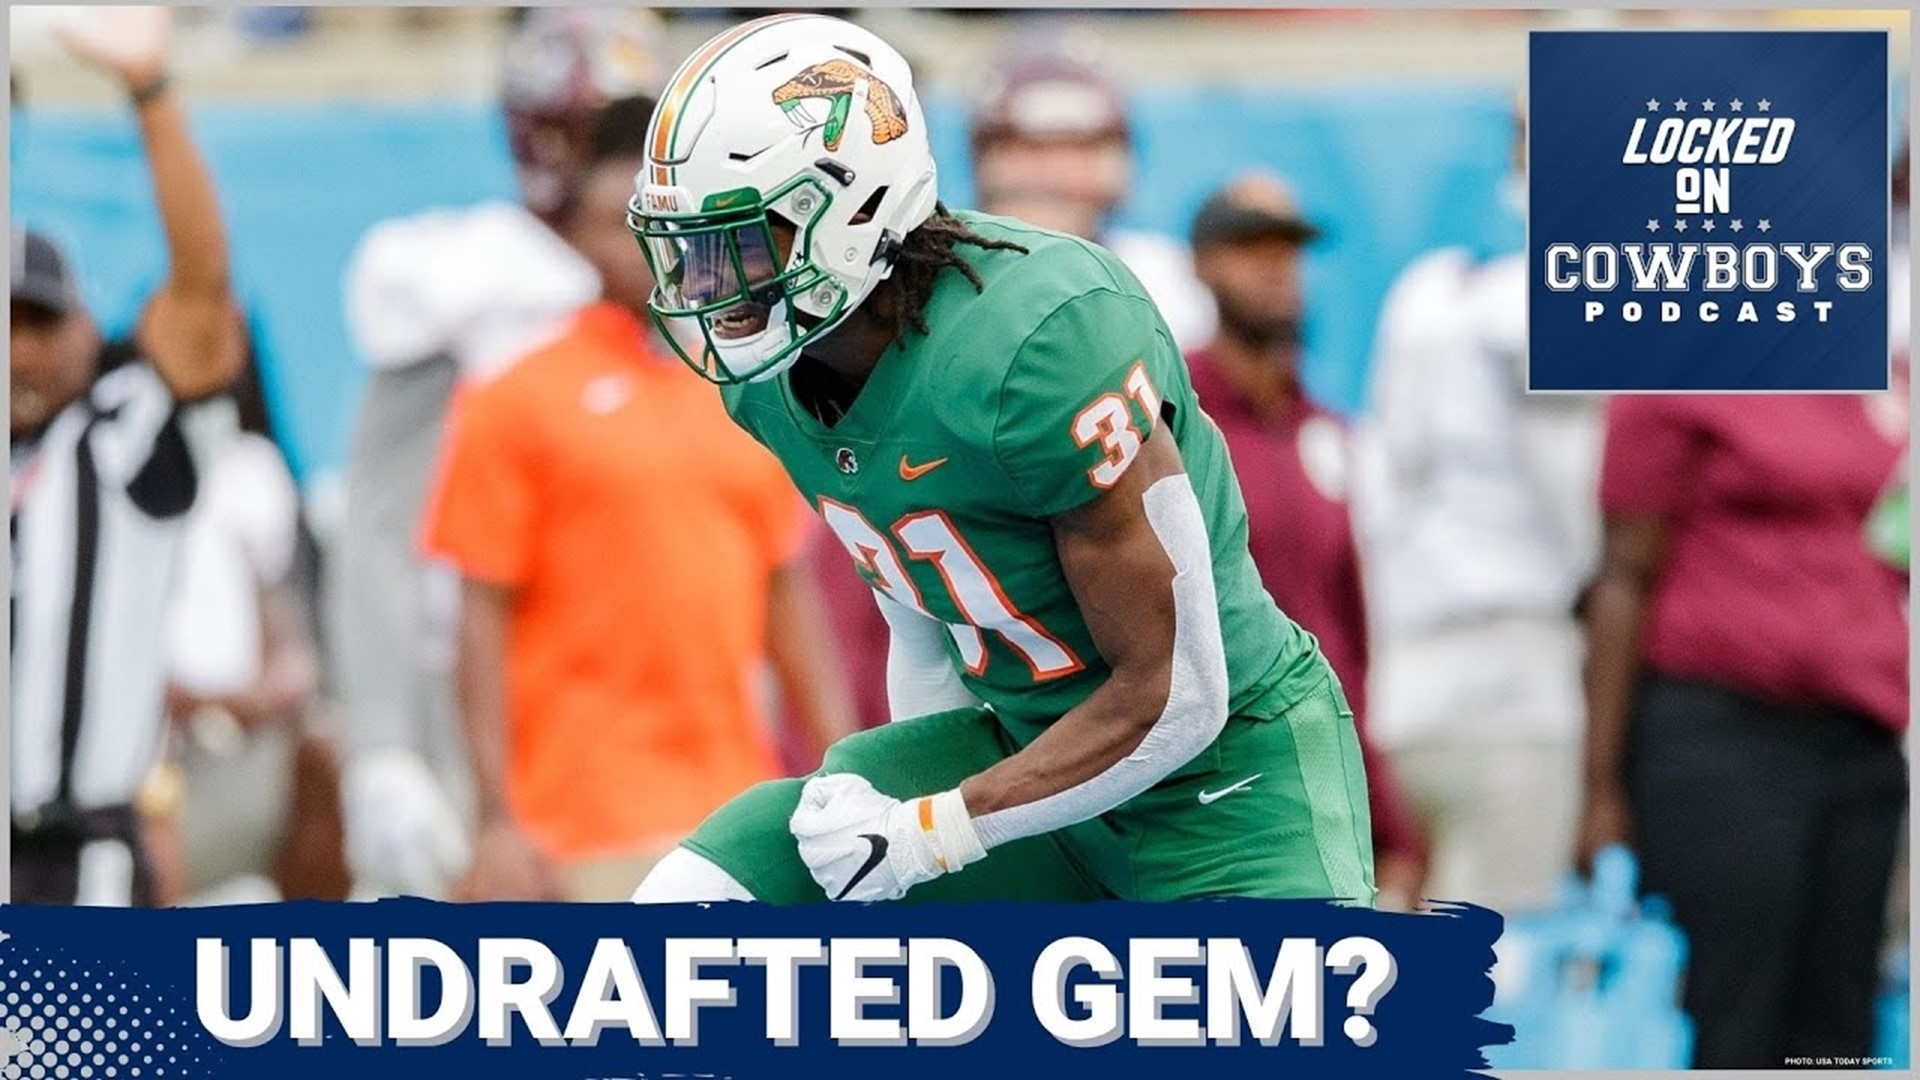 Marcus Mosher and Landon McCool discuss three undrafted free-agent defenders that could turn into steals for the Dallas Cowboys.